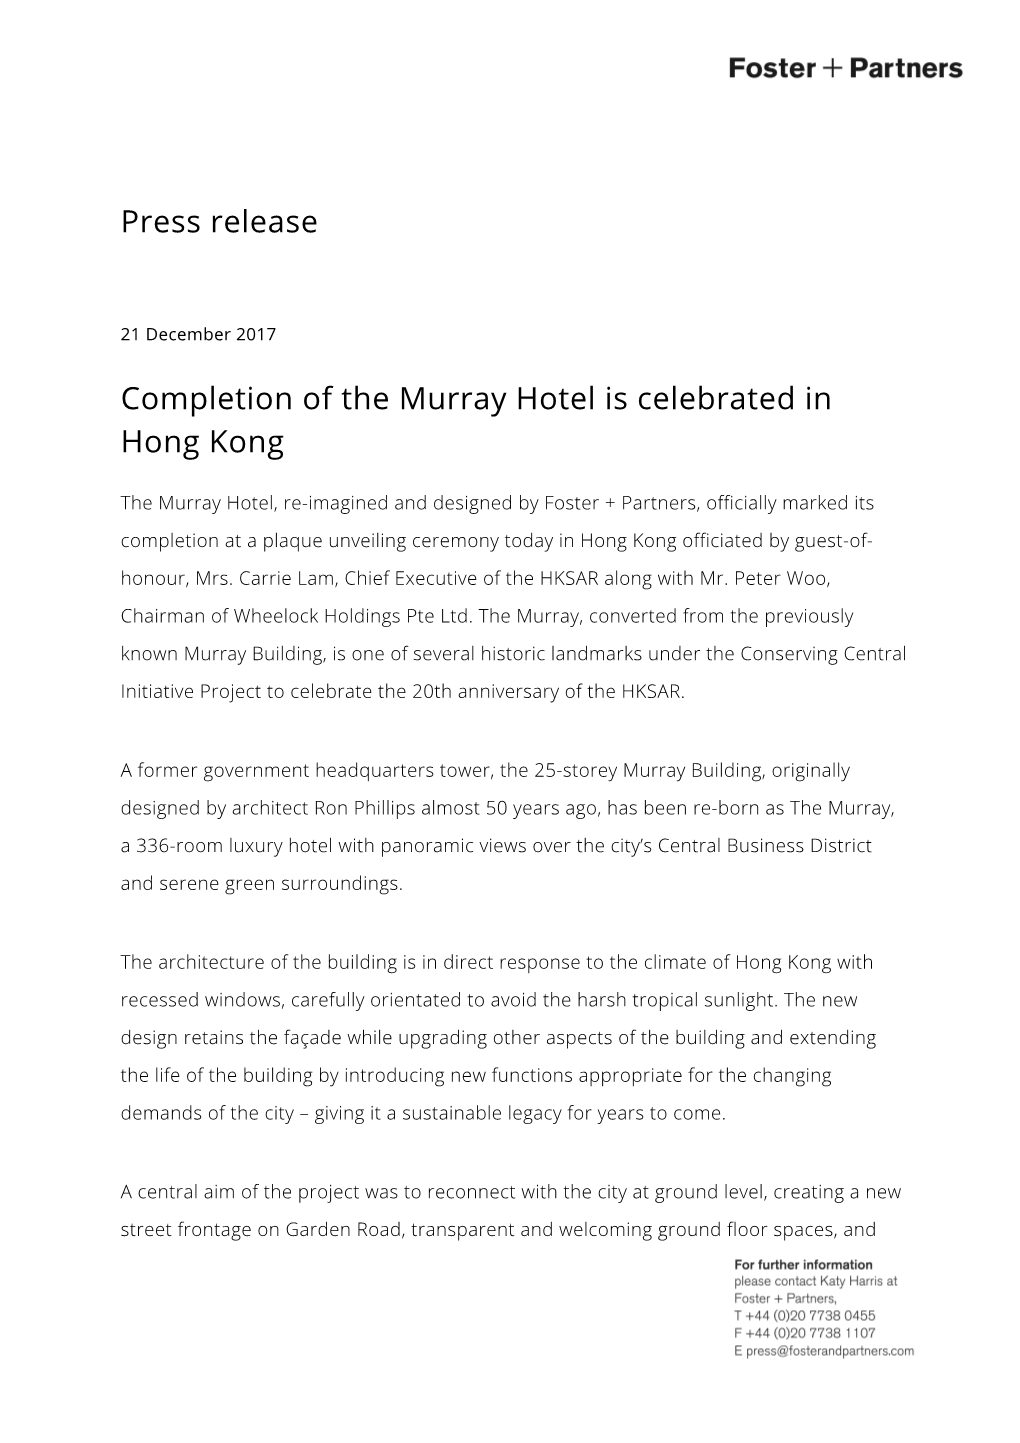 Press Release Completion of the Murray Hotel Is Celebrated in Hong